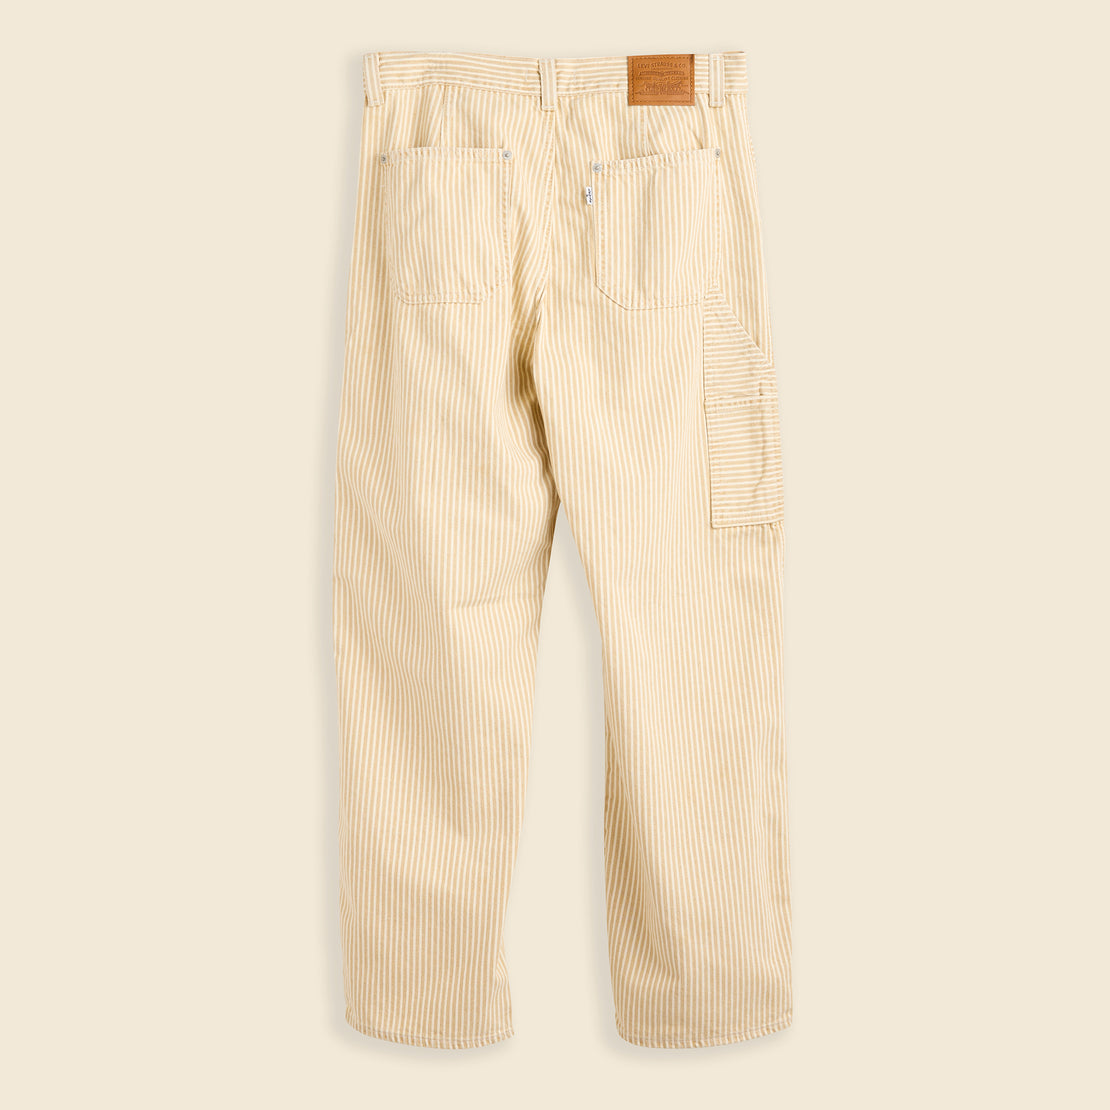 Dad Utility Pant - Lines in the Sand - Levis Premium - STAG Provisions - W - Pants - Twill